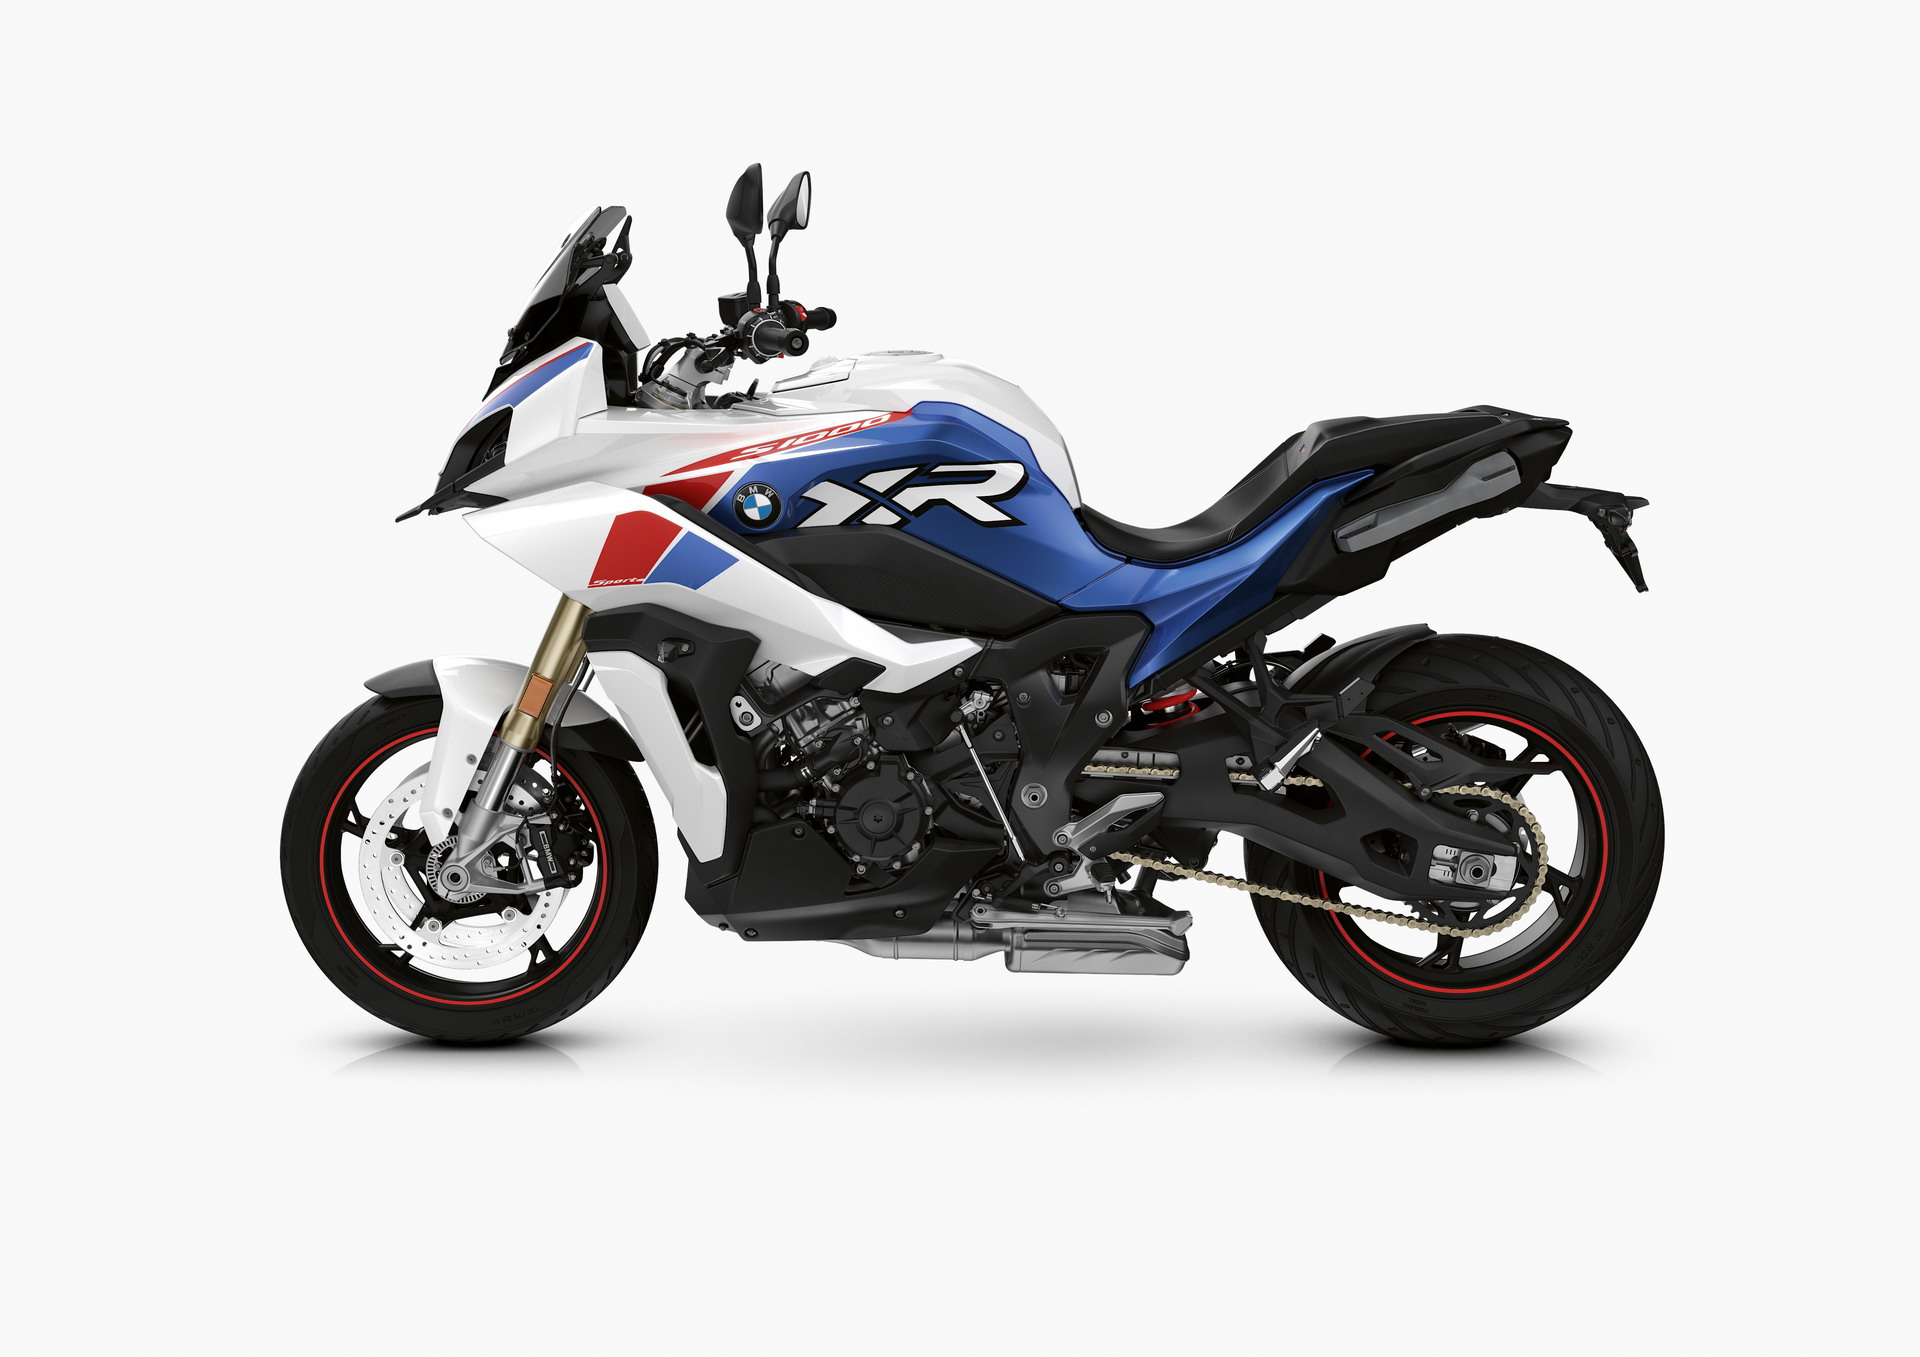 Bmw Motorrad Launches Extensive Updates For My21 Motorcycles